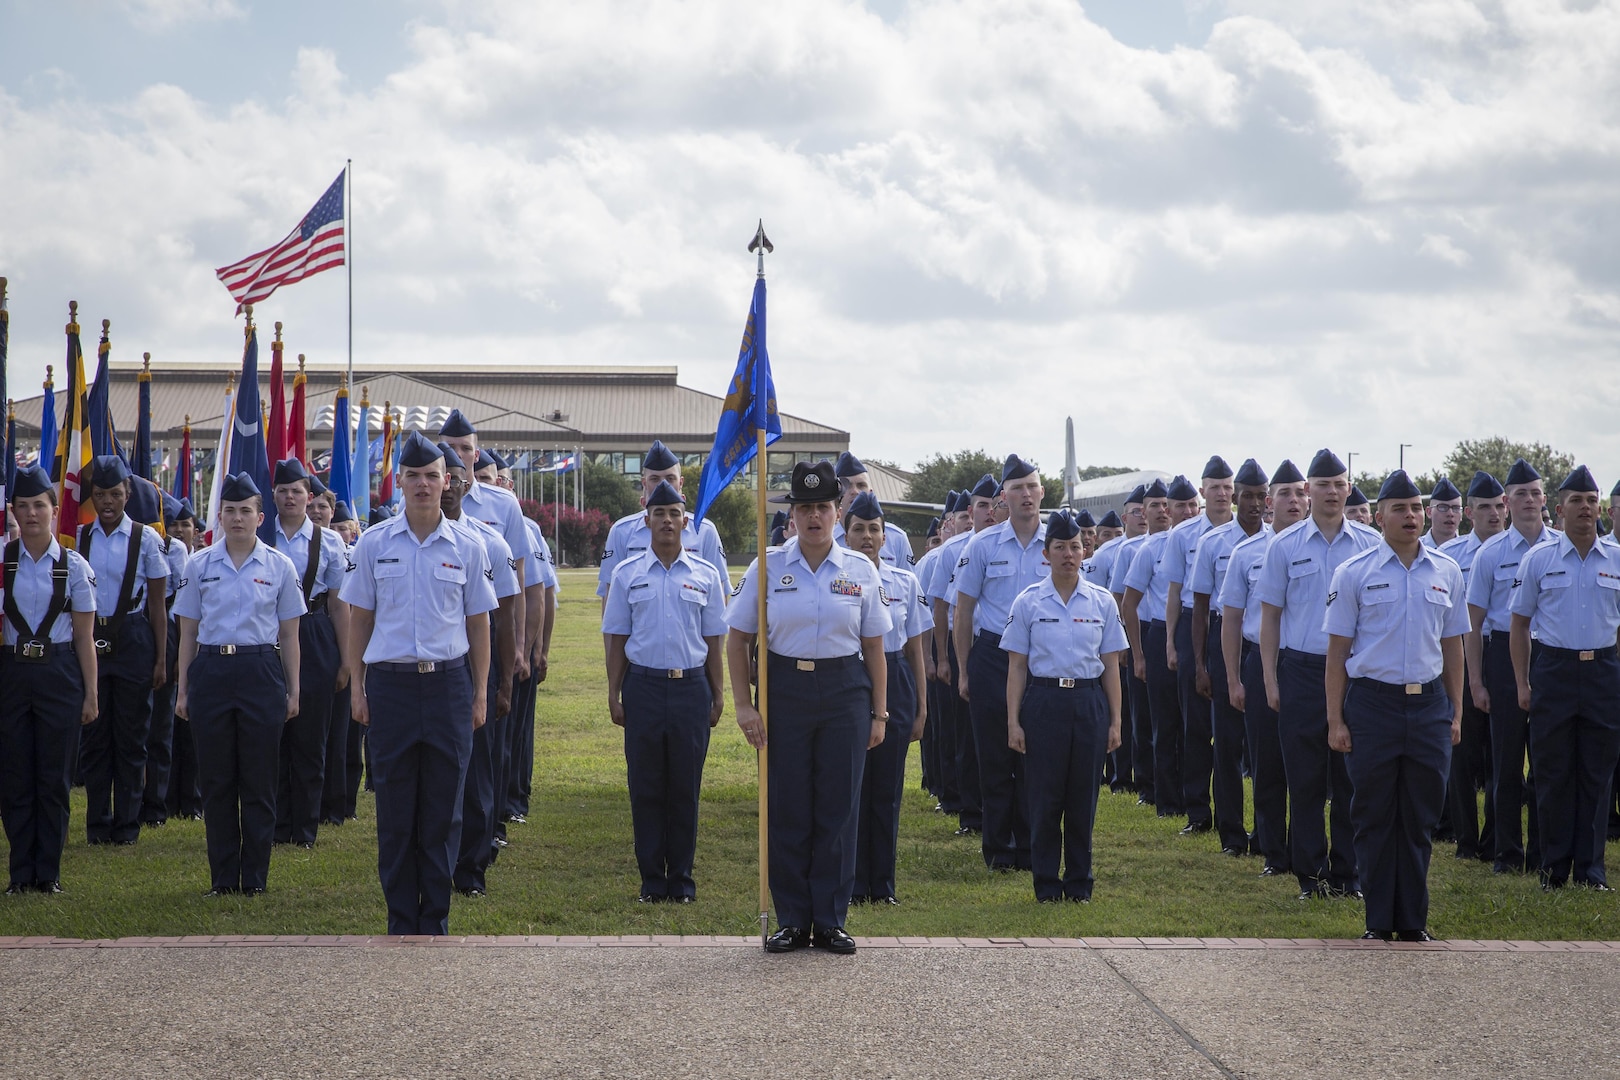 For the first time in Air Force Basic Military Training, Airmen march in integrated Heritage Flights during the Air Force Basic Training Graduation Parade July 17 at Joint Base San Antonio-Lackland. The Heritage flights, named after enlisted members in Air Force history, are part of a new initiative to completely gender integrate all facets of Air Force Basic Training and instill honor, as well as a deep understanding of the core values and appreciation for Airmen who paved the way for today’s Air Force.